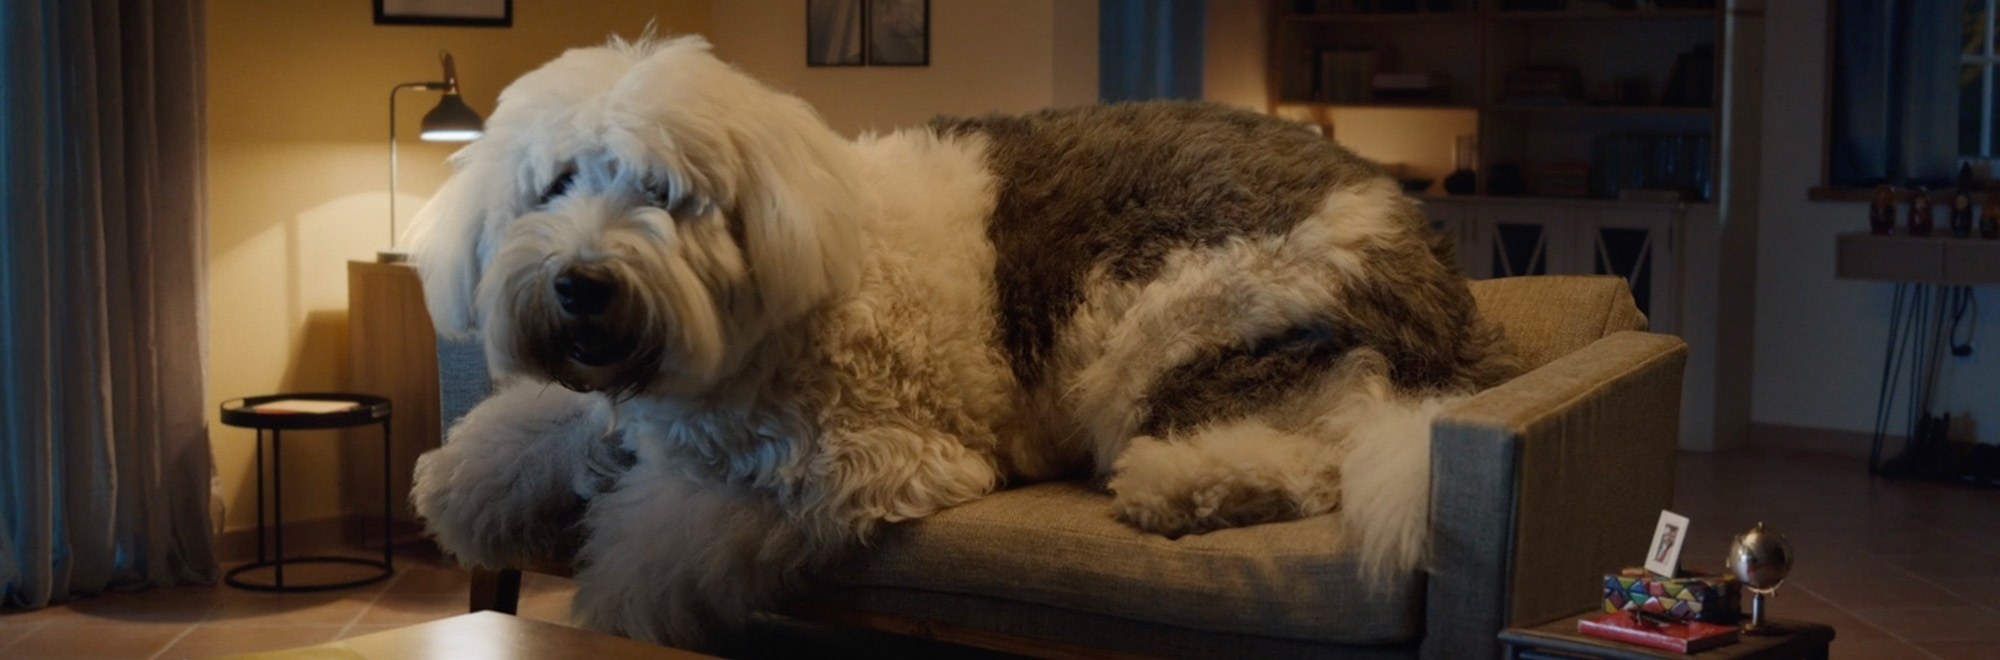 A giant dog grabs attention in this Skoda ad, but is it barking up the wrong tree?